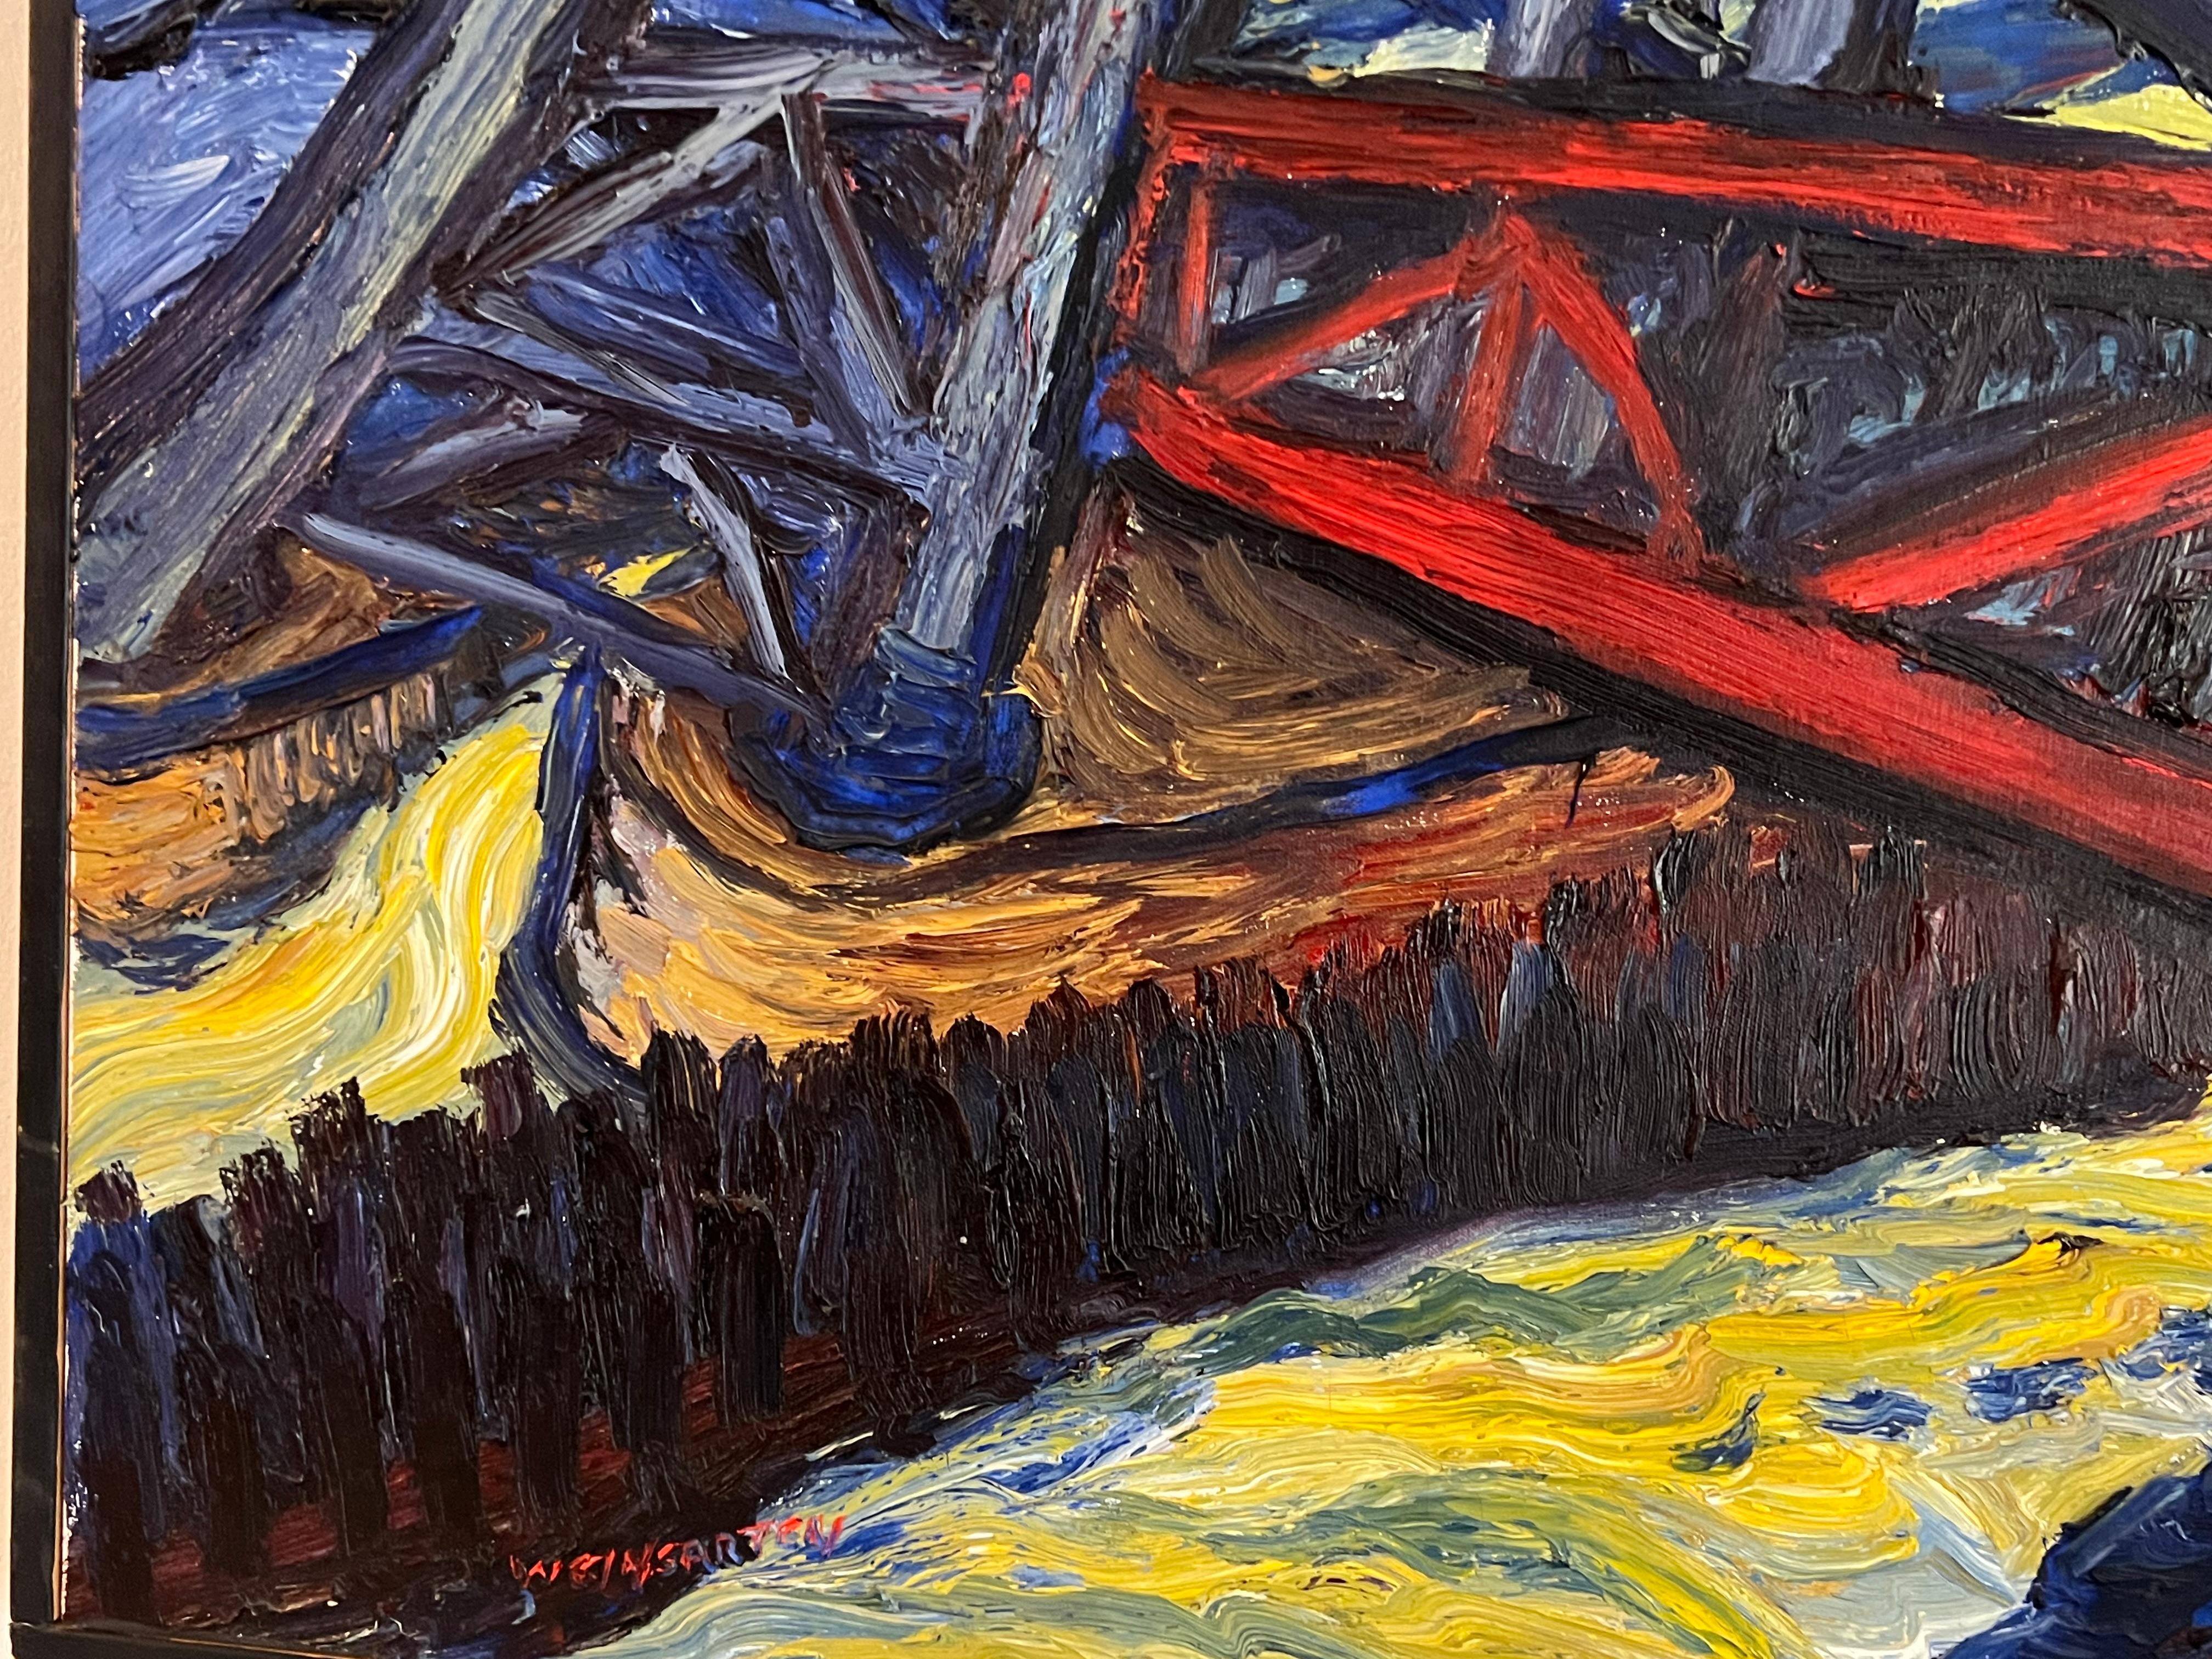 The artwork features a red bridge above a narrow river. A tiny boat passes by, between the two huge structures holding the bridge on each side. Depicting an industrial environment, the artist gave the overall impression of a middle ground between